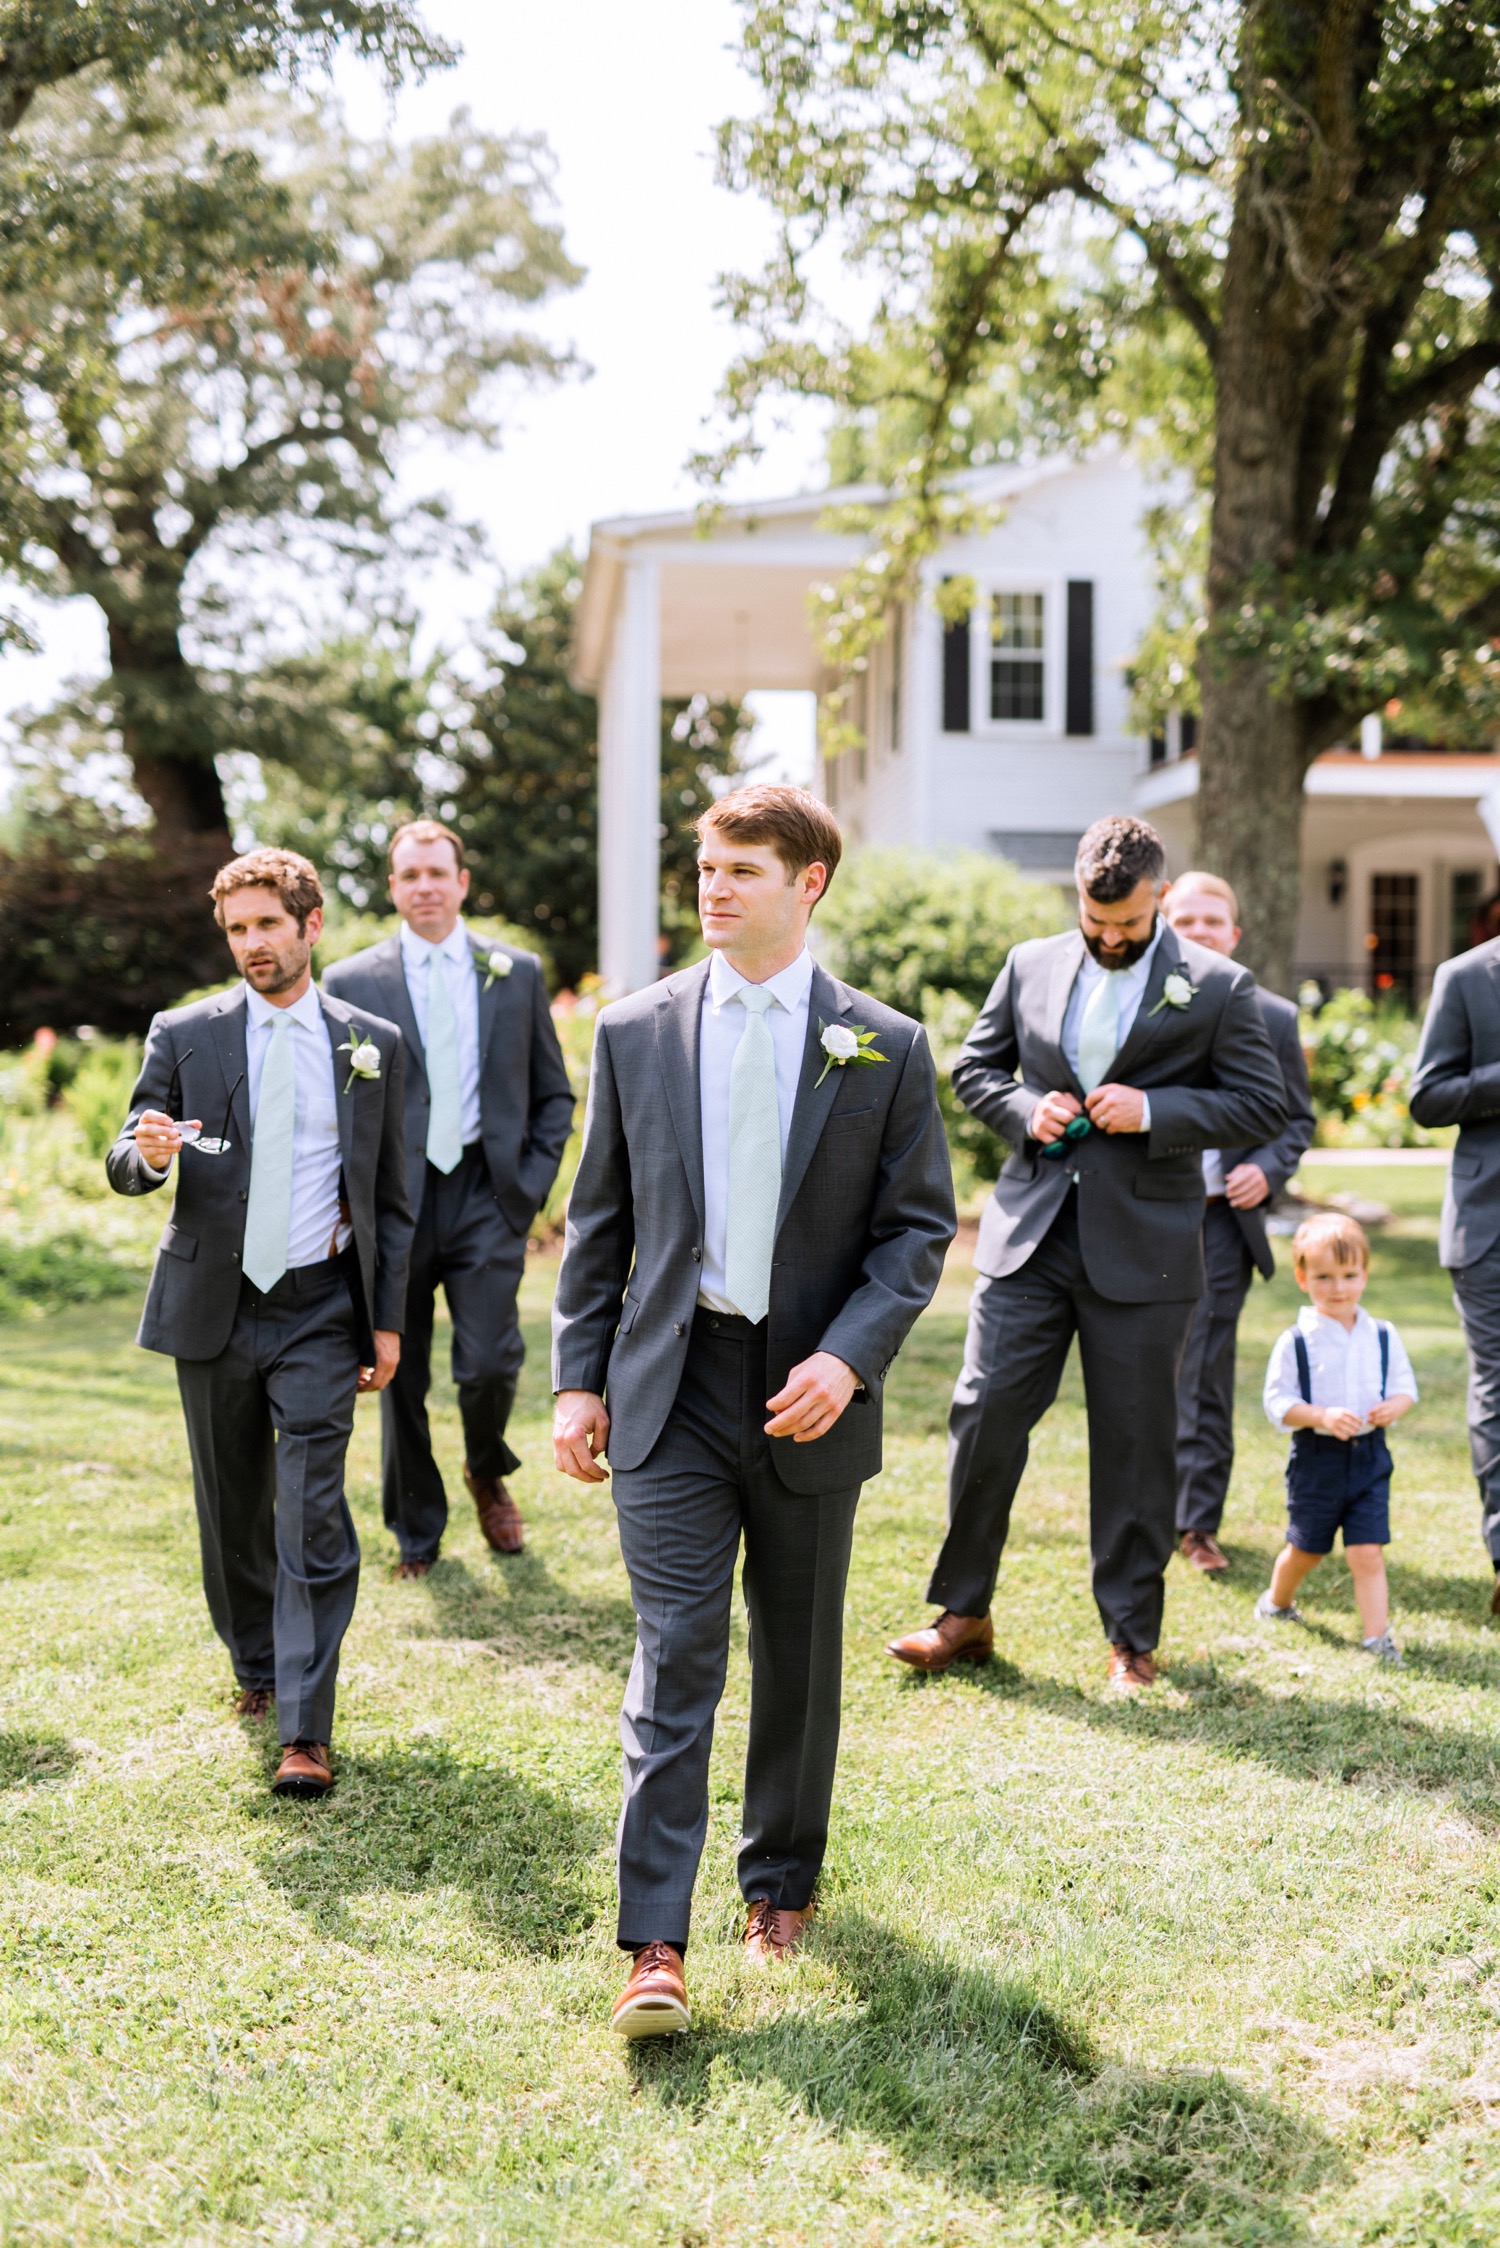 Groom and groomsmen dressed and ready for the wedding ceremony in Richmond, Virginia summer wedding